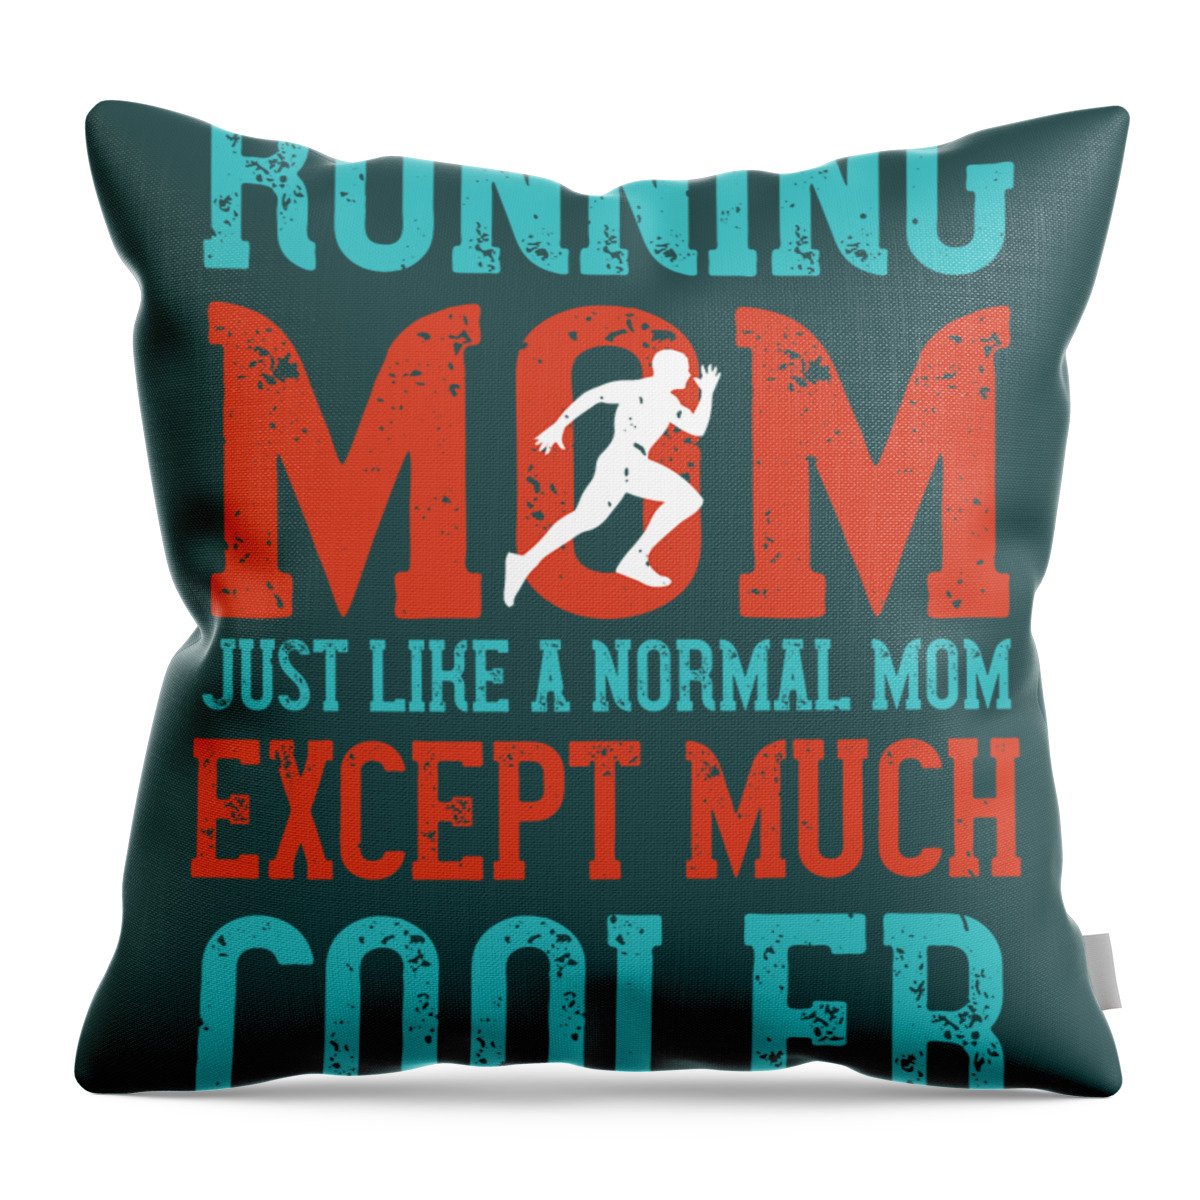 Runner Throw Pillow featuring the digital art Runner Gift Running Mom Just Like A Normal Mom Except Much Cooler by Jeff Creation